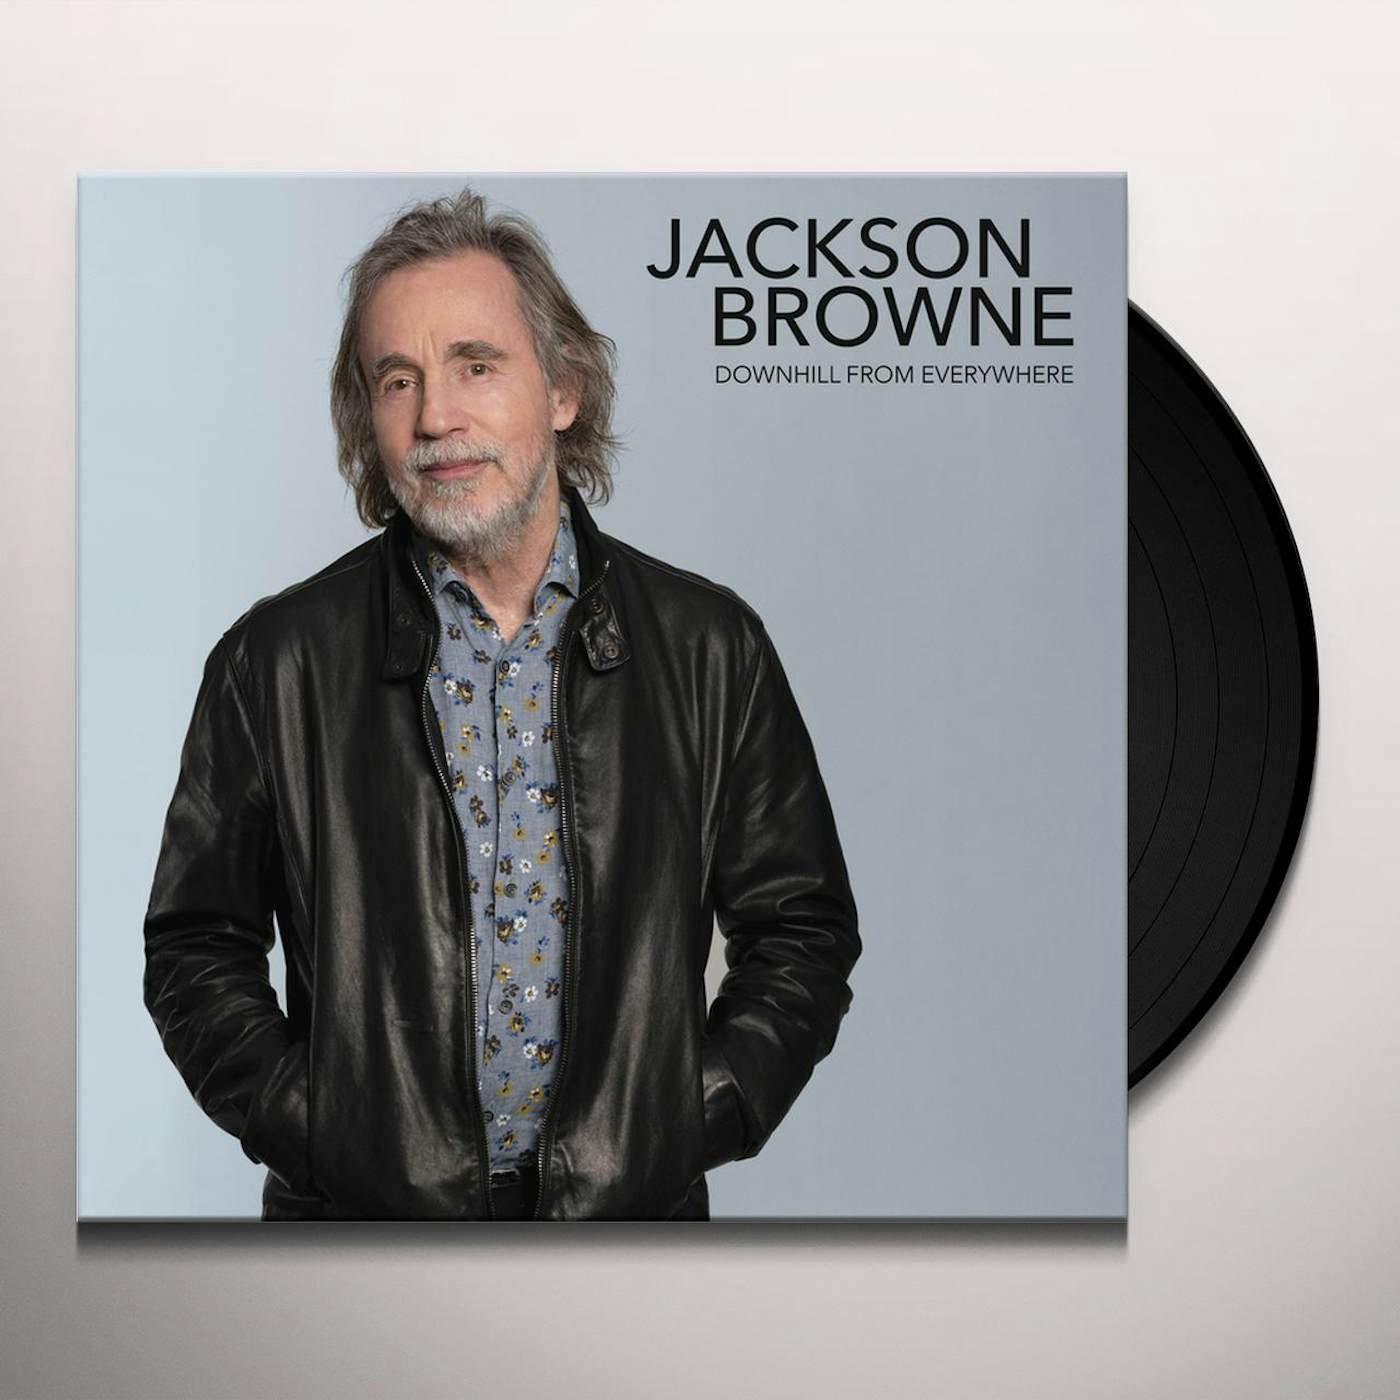 Jackson Browne DOWNHILL FROM EVERYWHERE / A LITTLE SOON TO SAY Vinyl Record